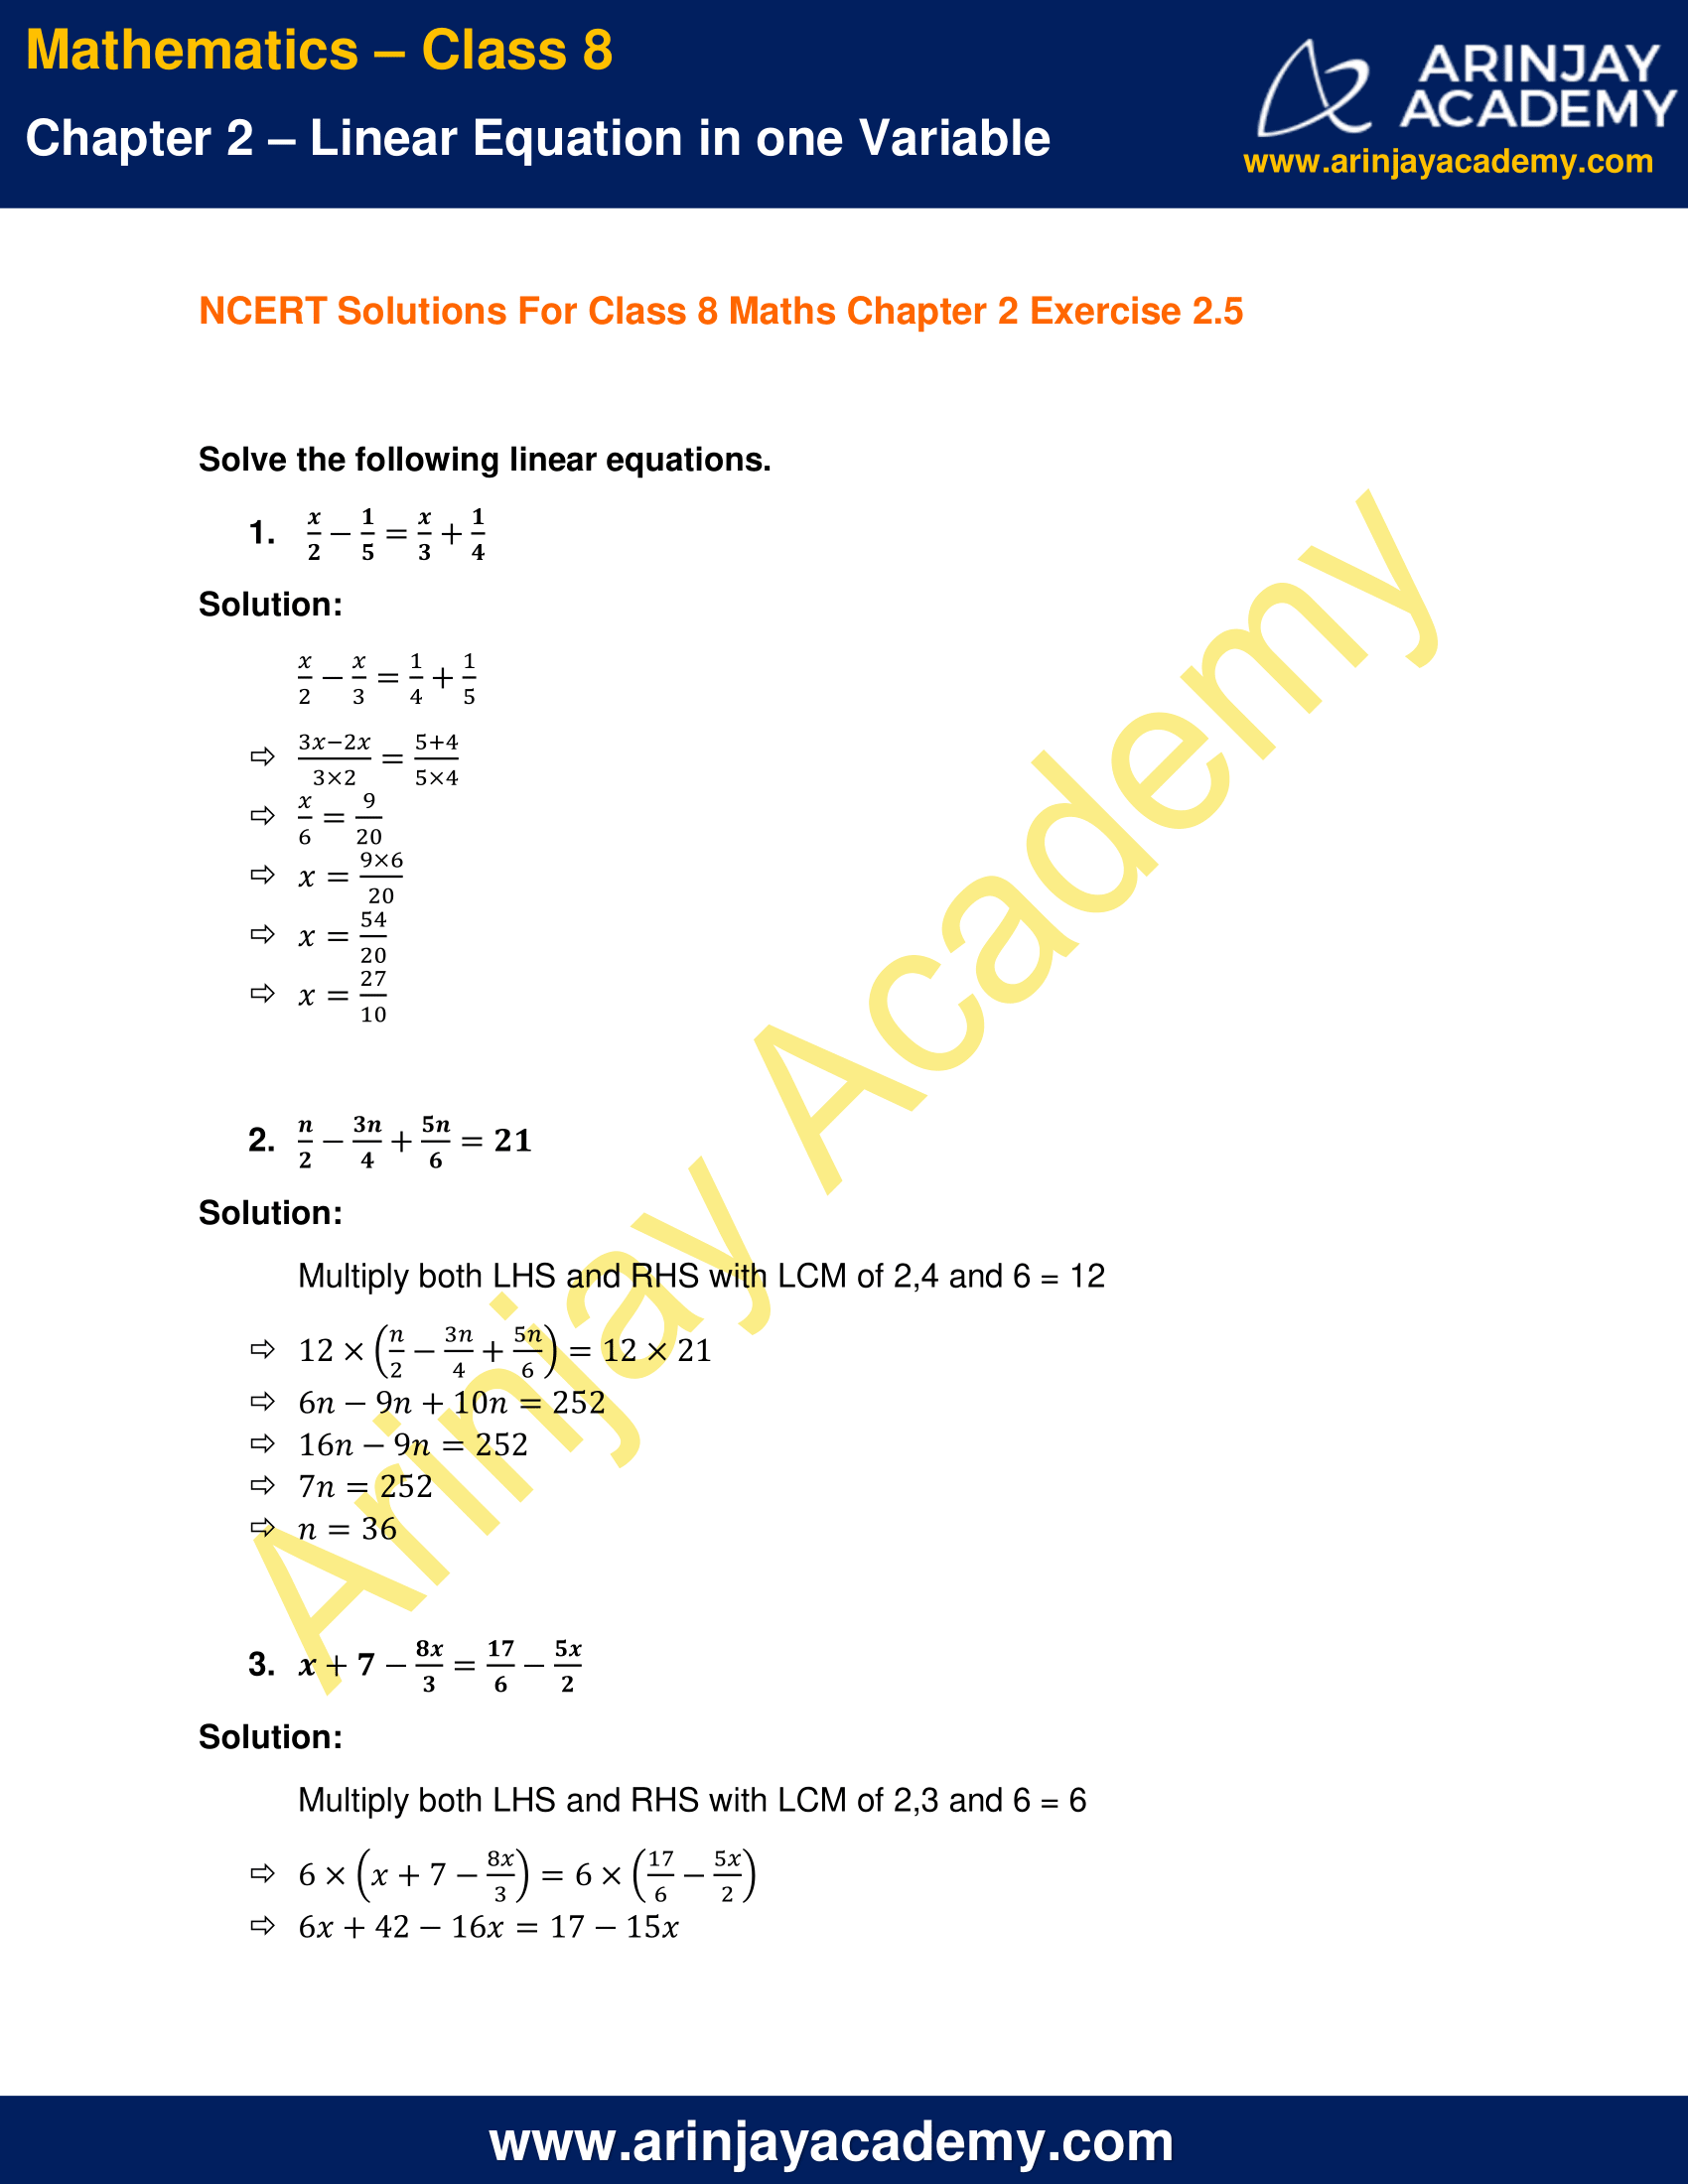 NCERT Solutions for Class 8 Maths Chapter 2 Exercise 2.5 image 1